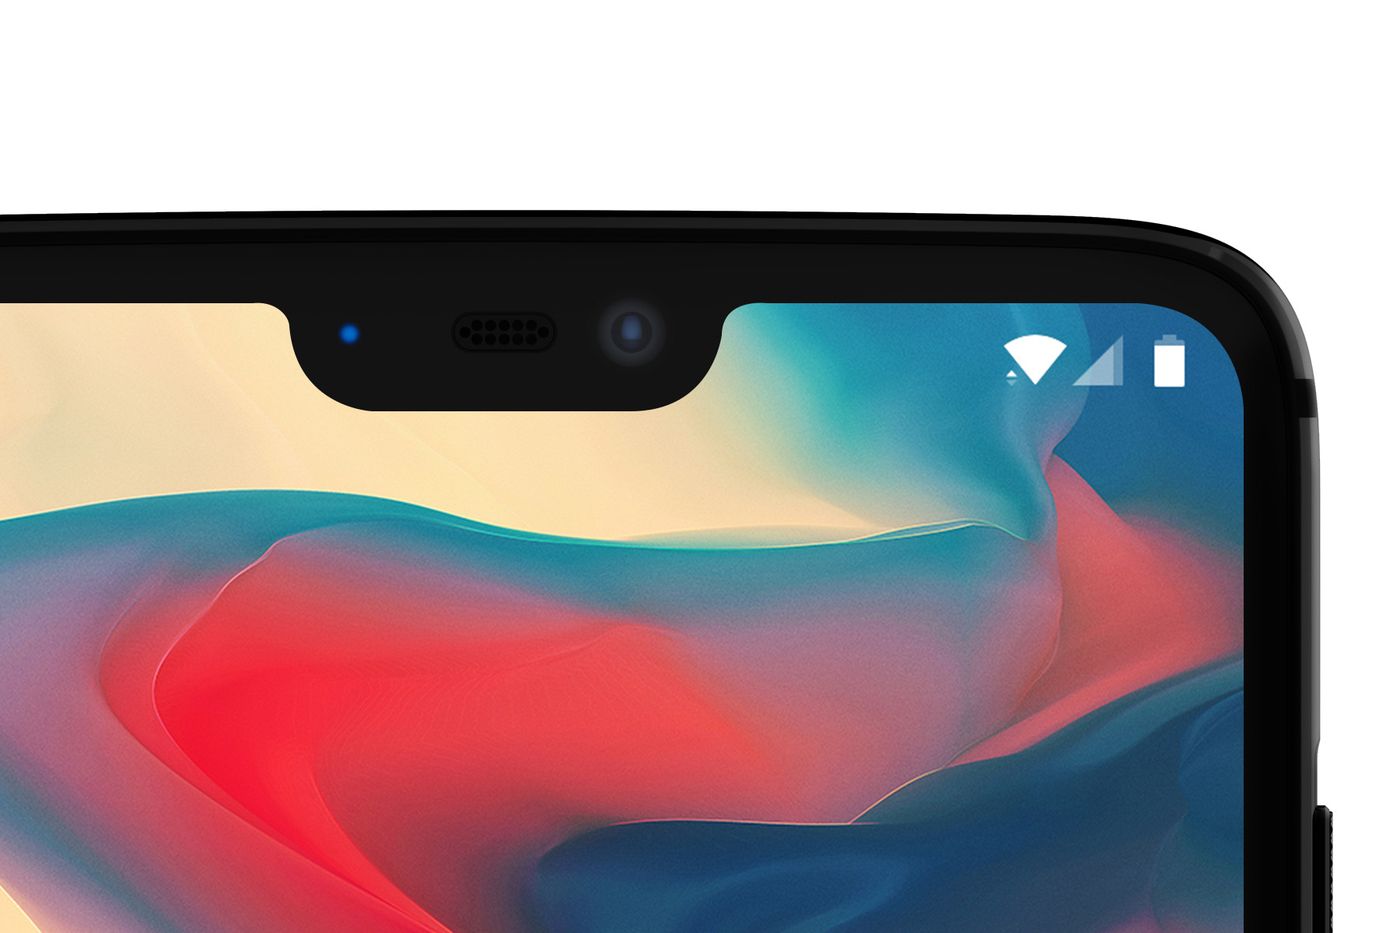 oneplus 6 will possess a notch, ceo carl pei insist us to "love the notch"